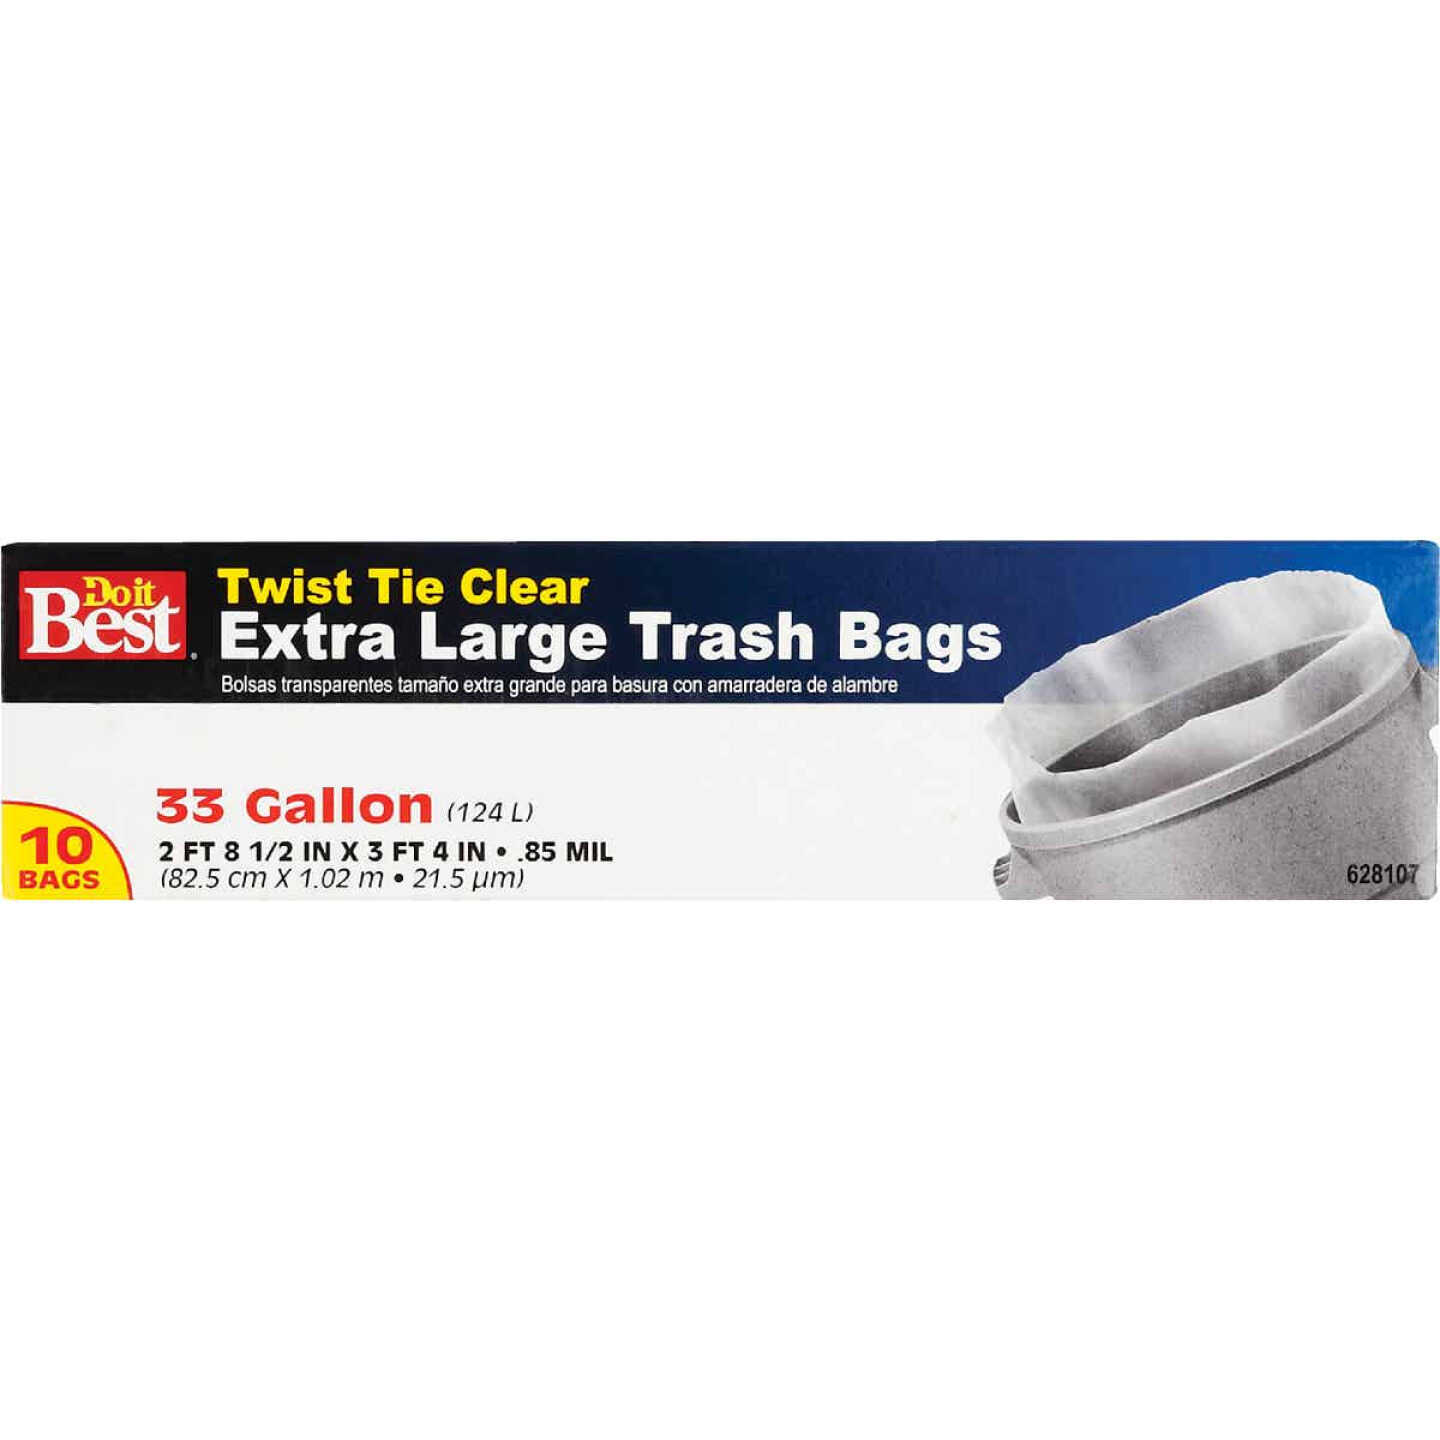 Glad Guaranteed Strong 30 Gal. Large Black Trash Bag (15-Count) - Power  Townsend Company